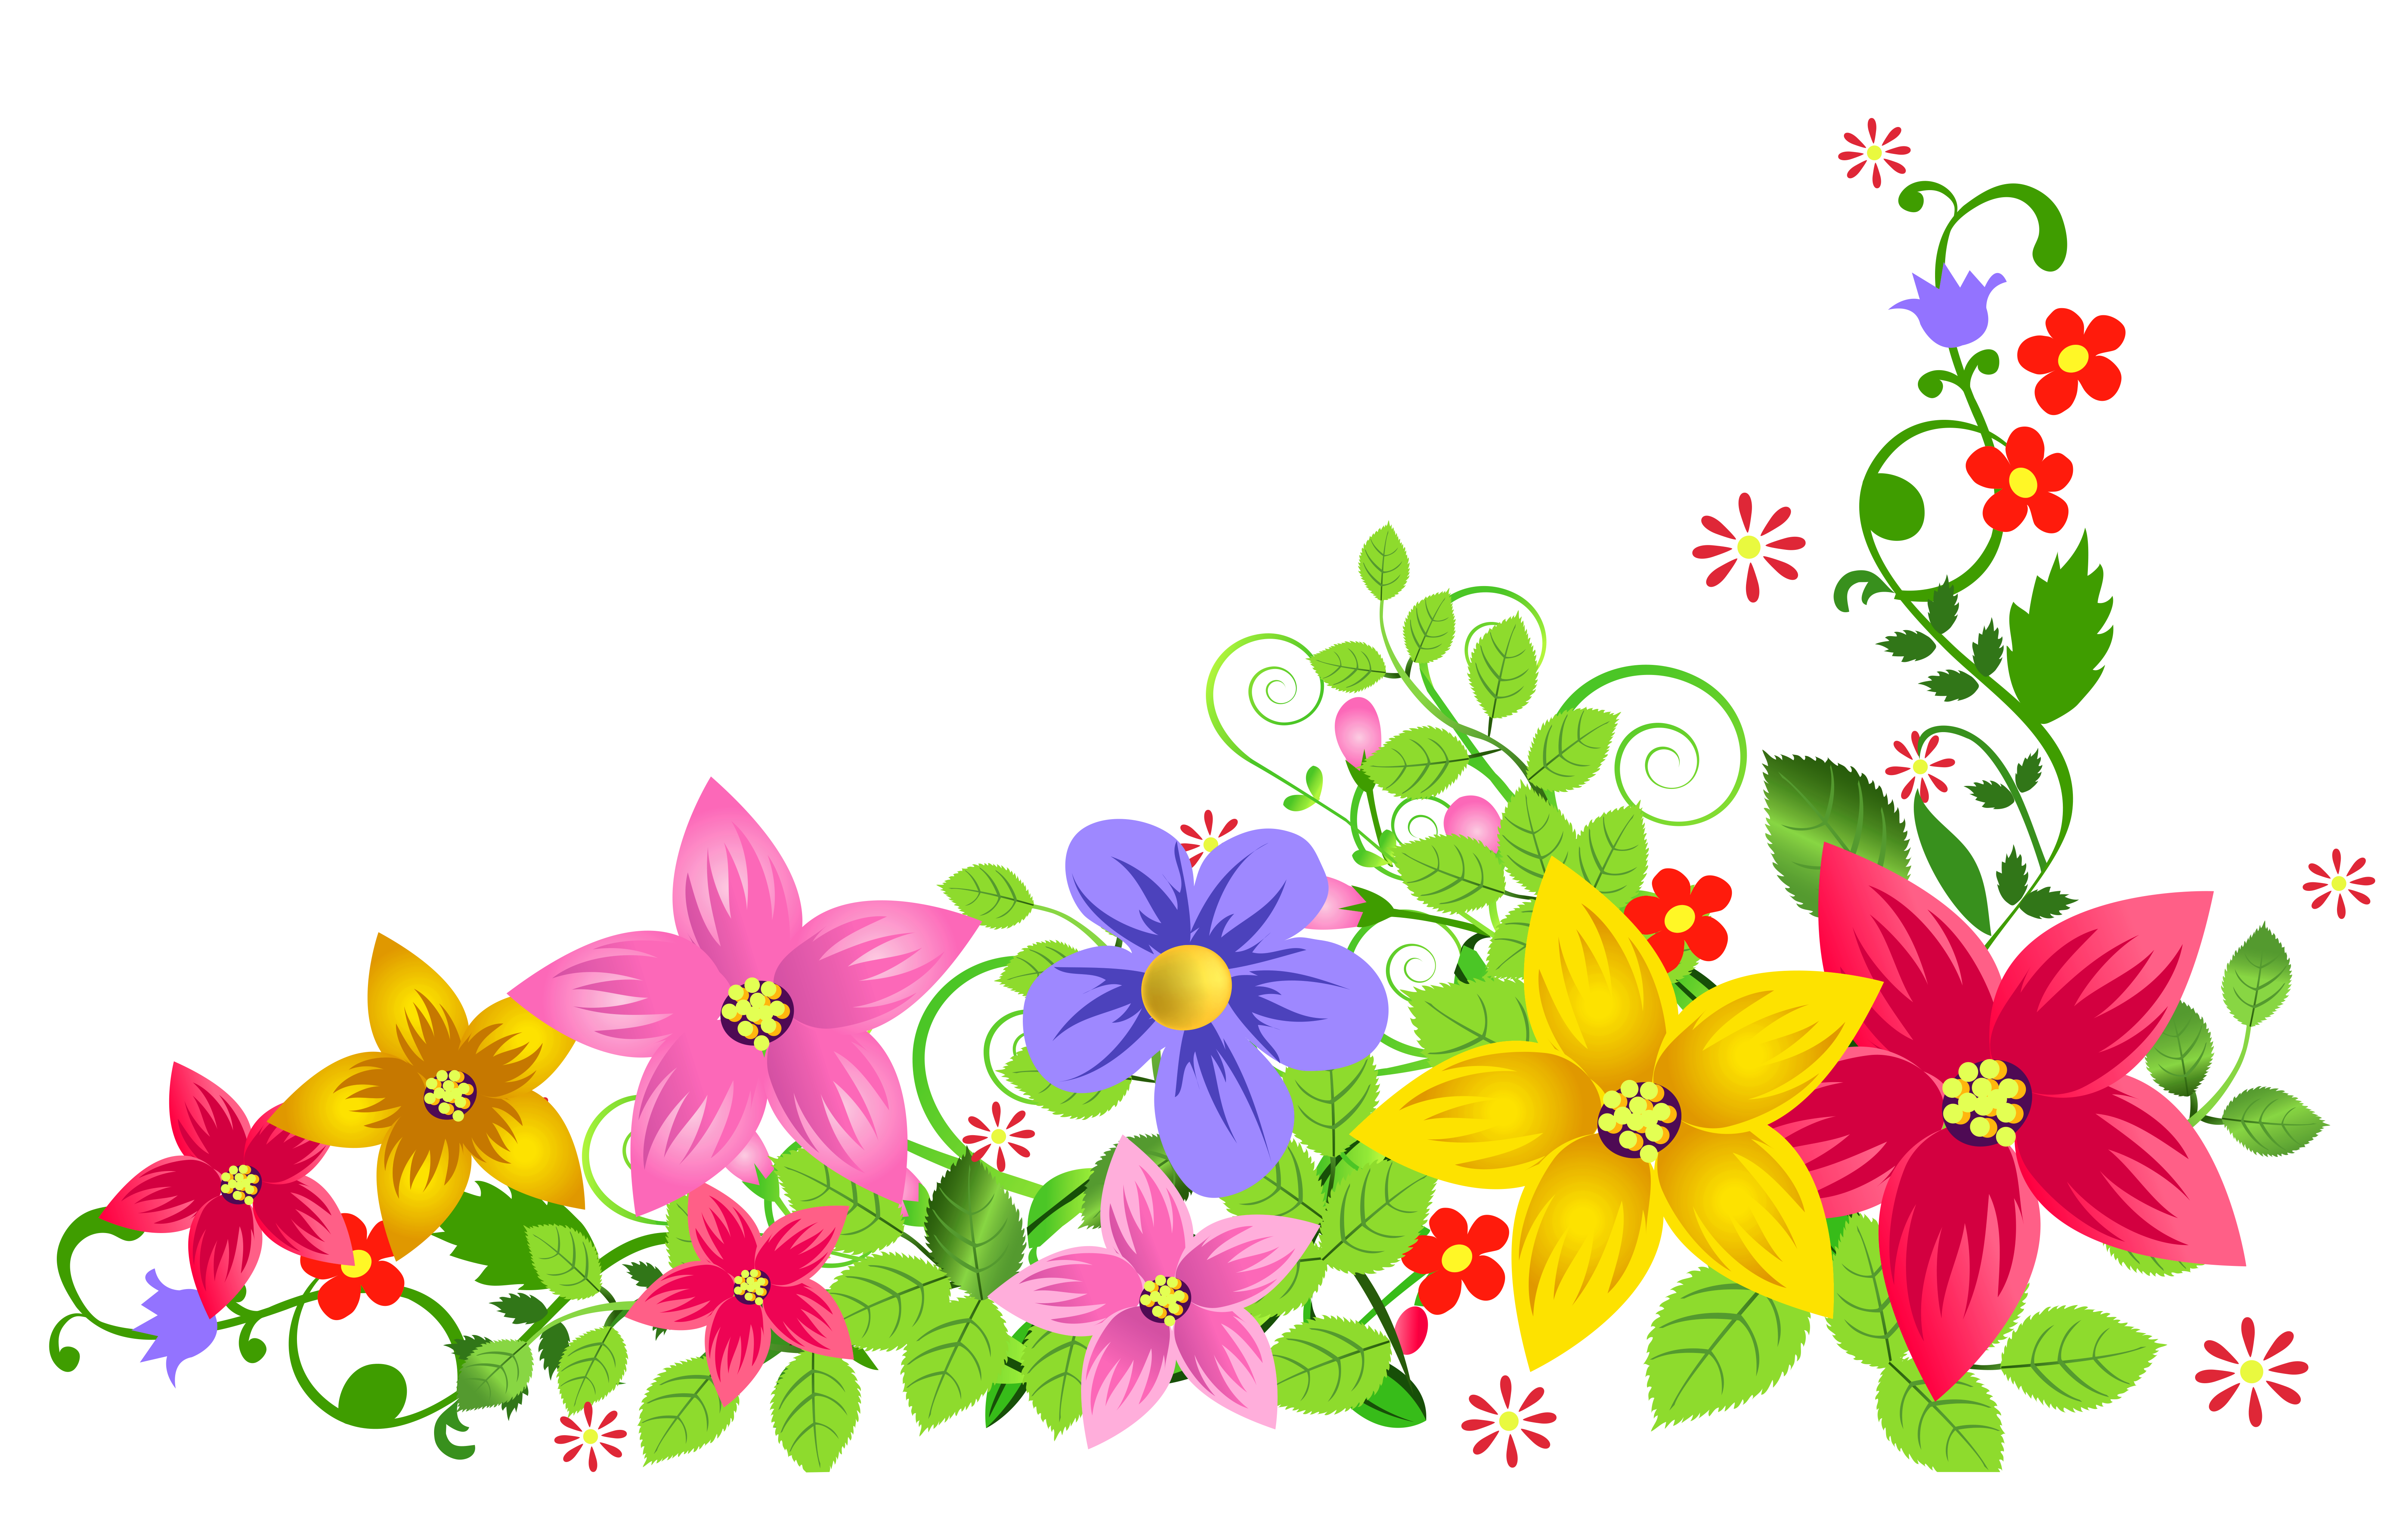 Free Transparent Flower Background, Download Free Transparent Flower Background png image, Free ClipArts on Clipart Library